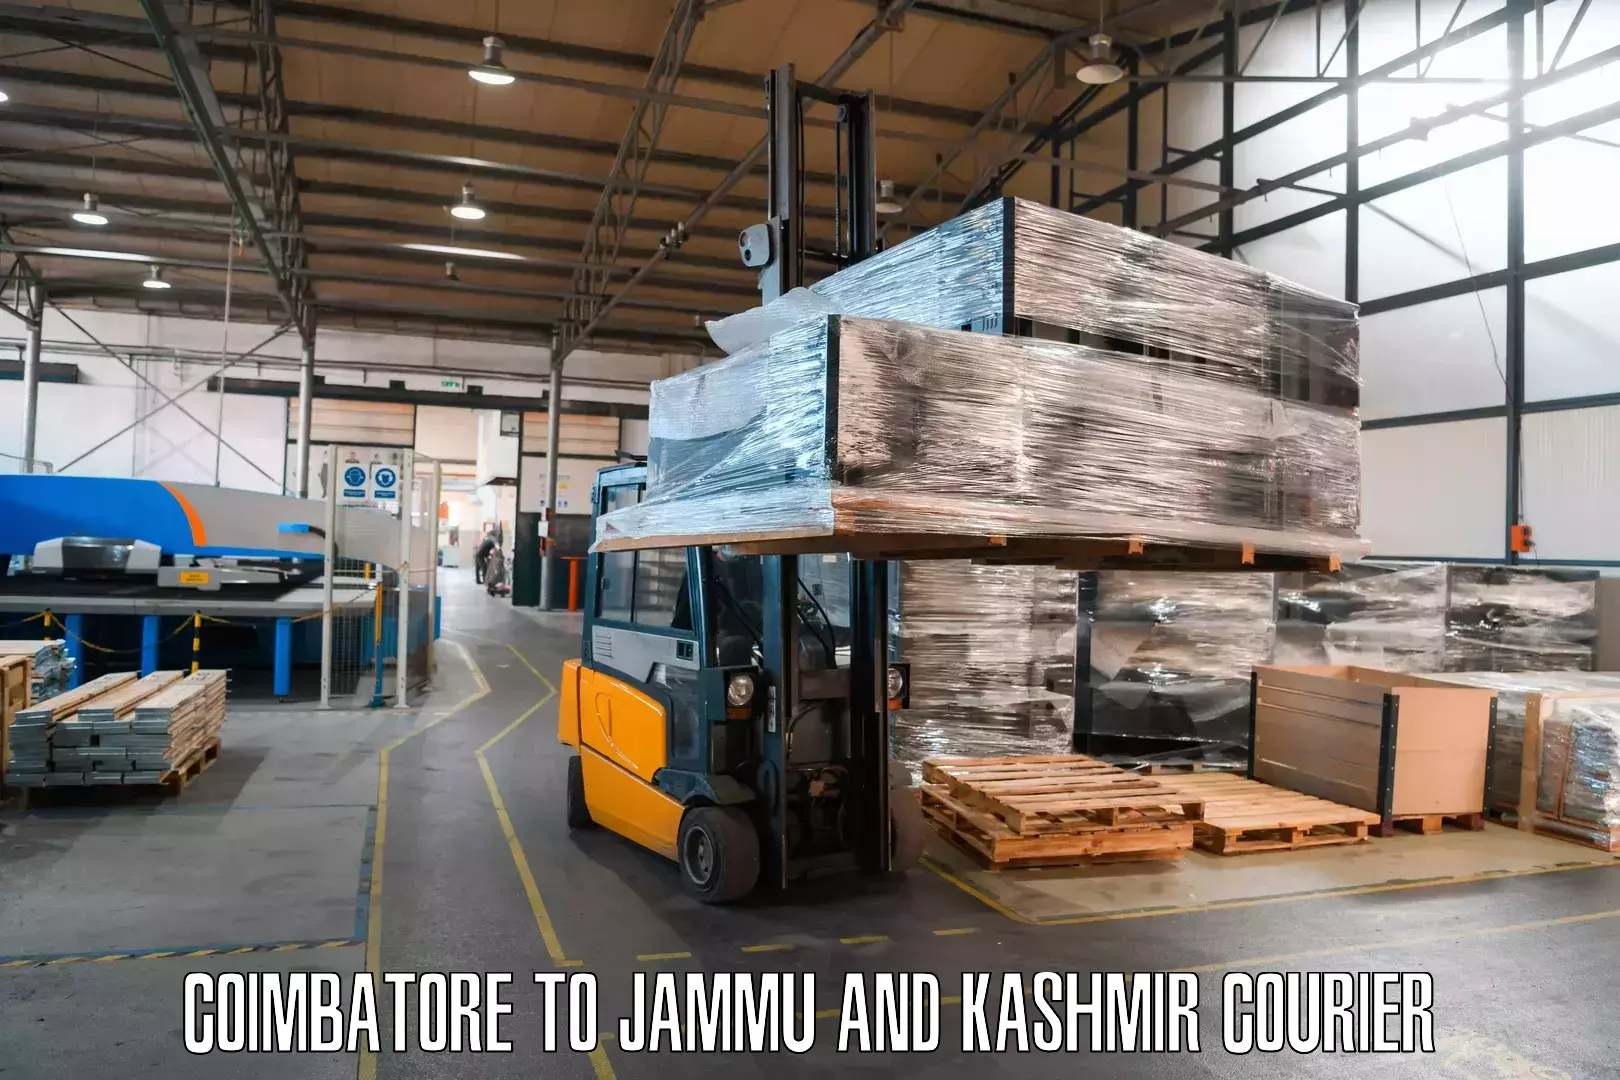 Secure package delivery Coimbatore to Srinagar Kashmir